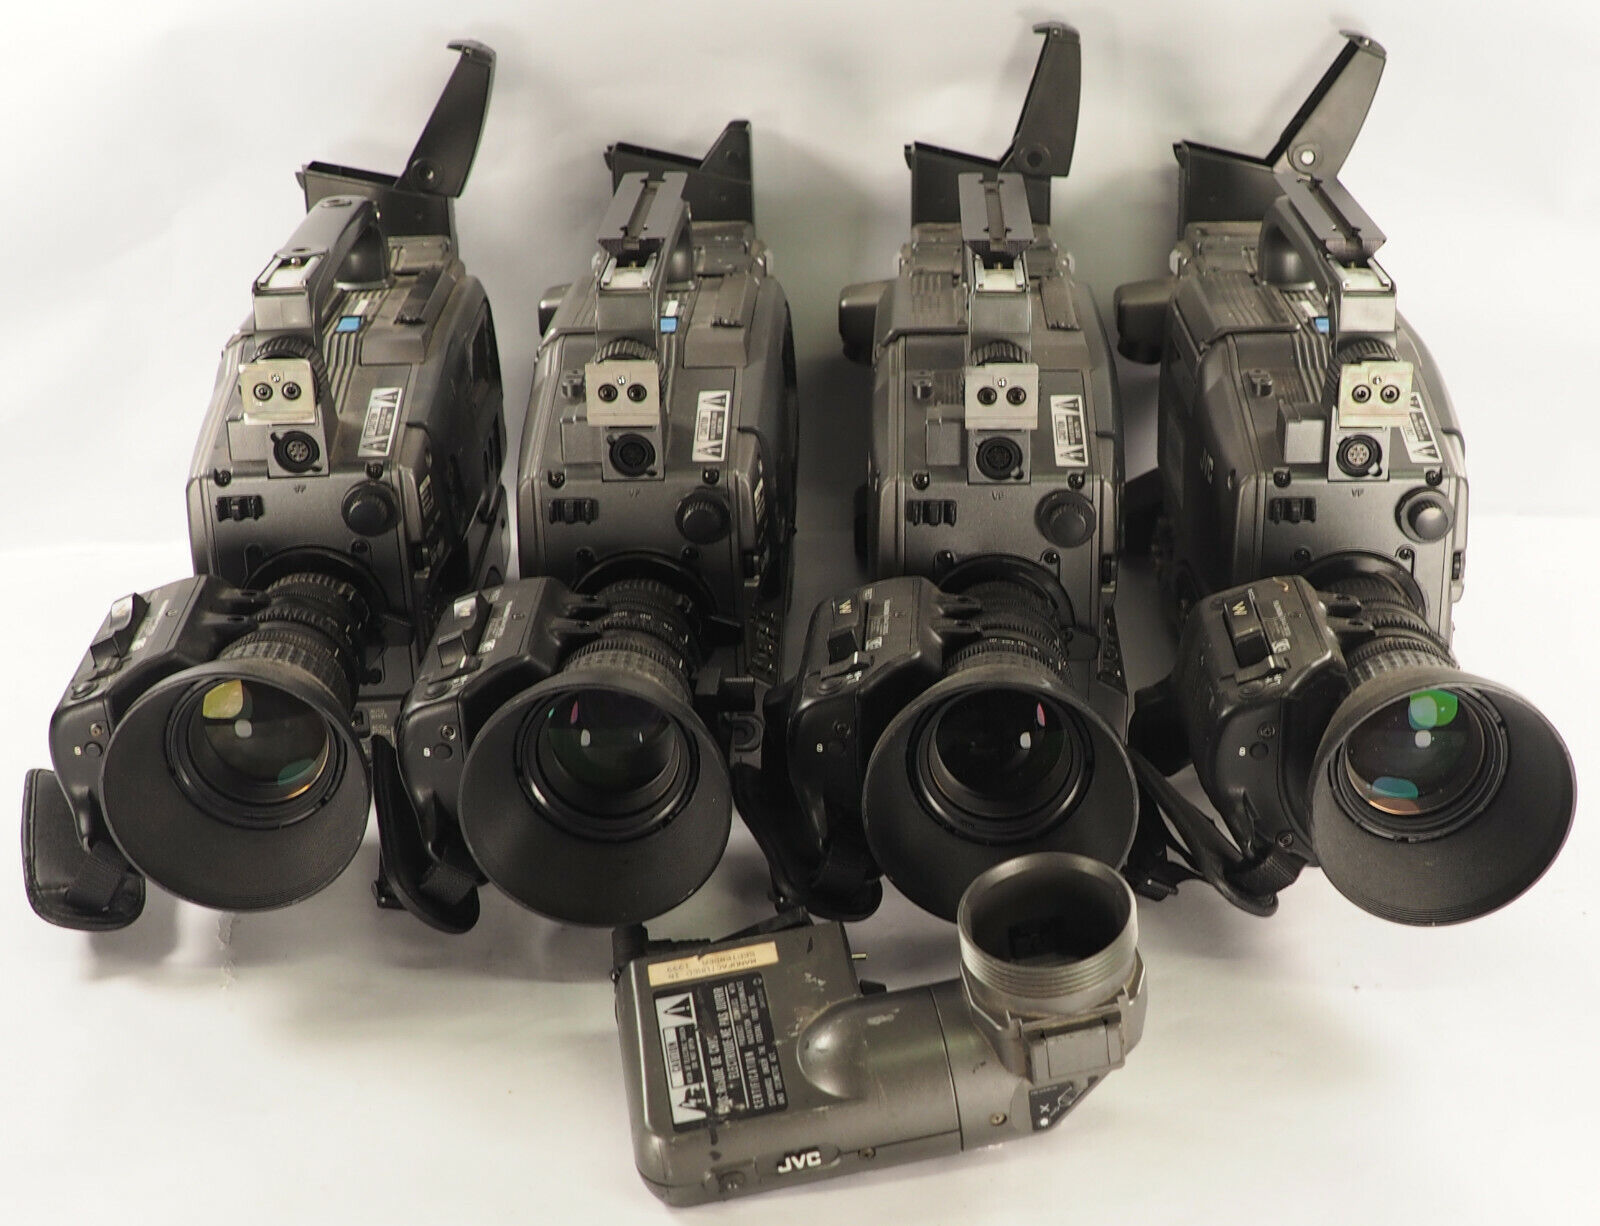 Lot of 4 Limited JVC DV CAMCORDER GY-DV550U And GY-DV500U With Fujinon-TV-Z Lens JVC GY-DV550U, GY-DV500U